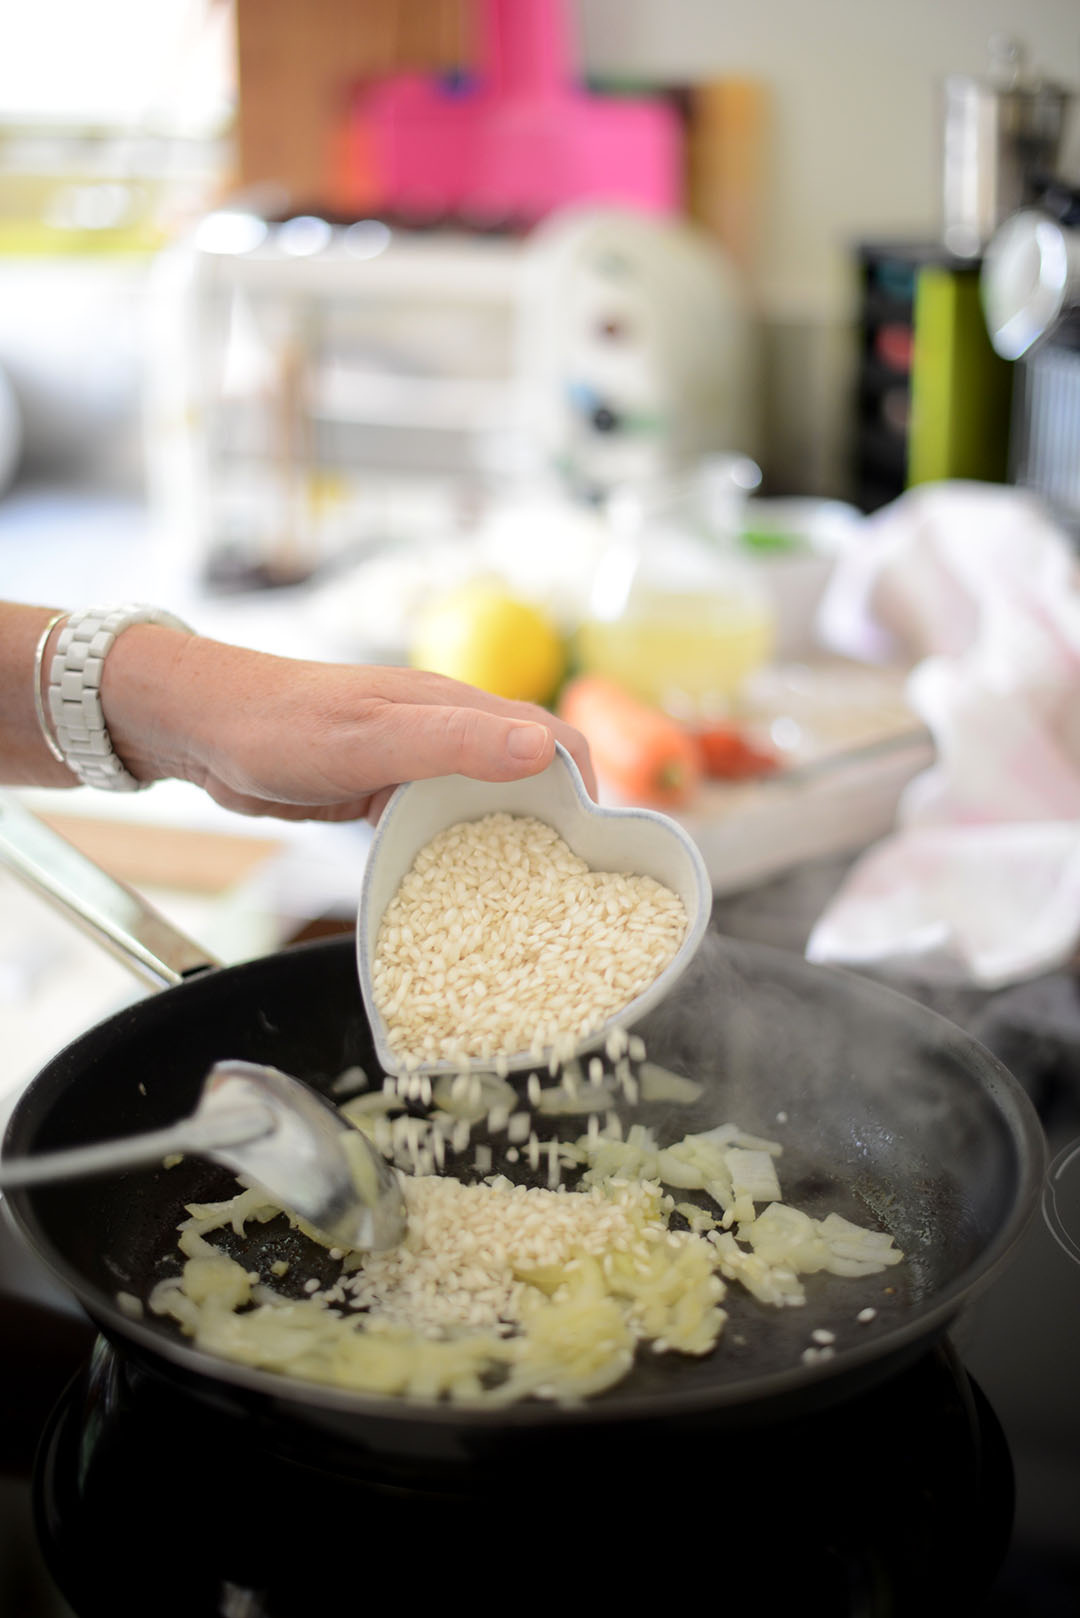 crab and parmesan risotto recipe with Ruby & Kind